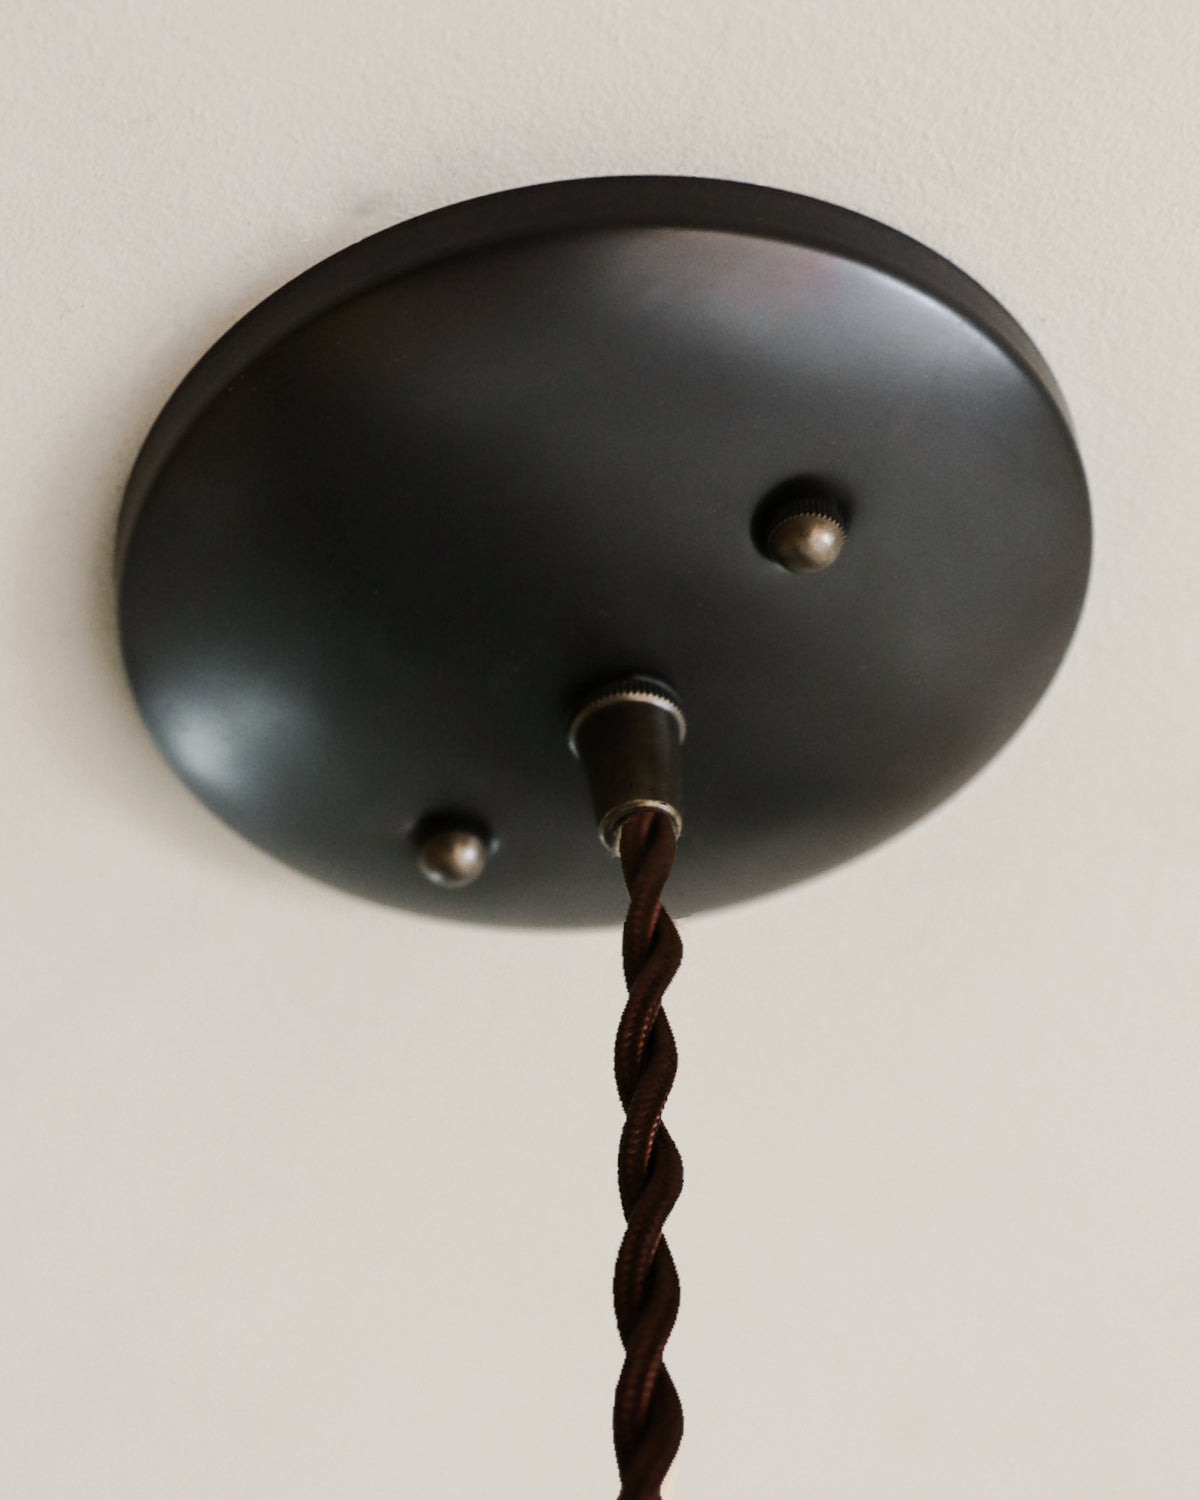 Black leather cylinder pendant with handstitched, perforated leather shade. Made by Lostine in Philadelphia. Hardwired or plug light fixture. Simple interior design, made in the USA.